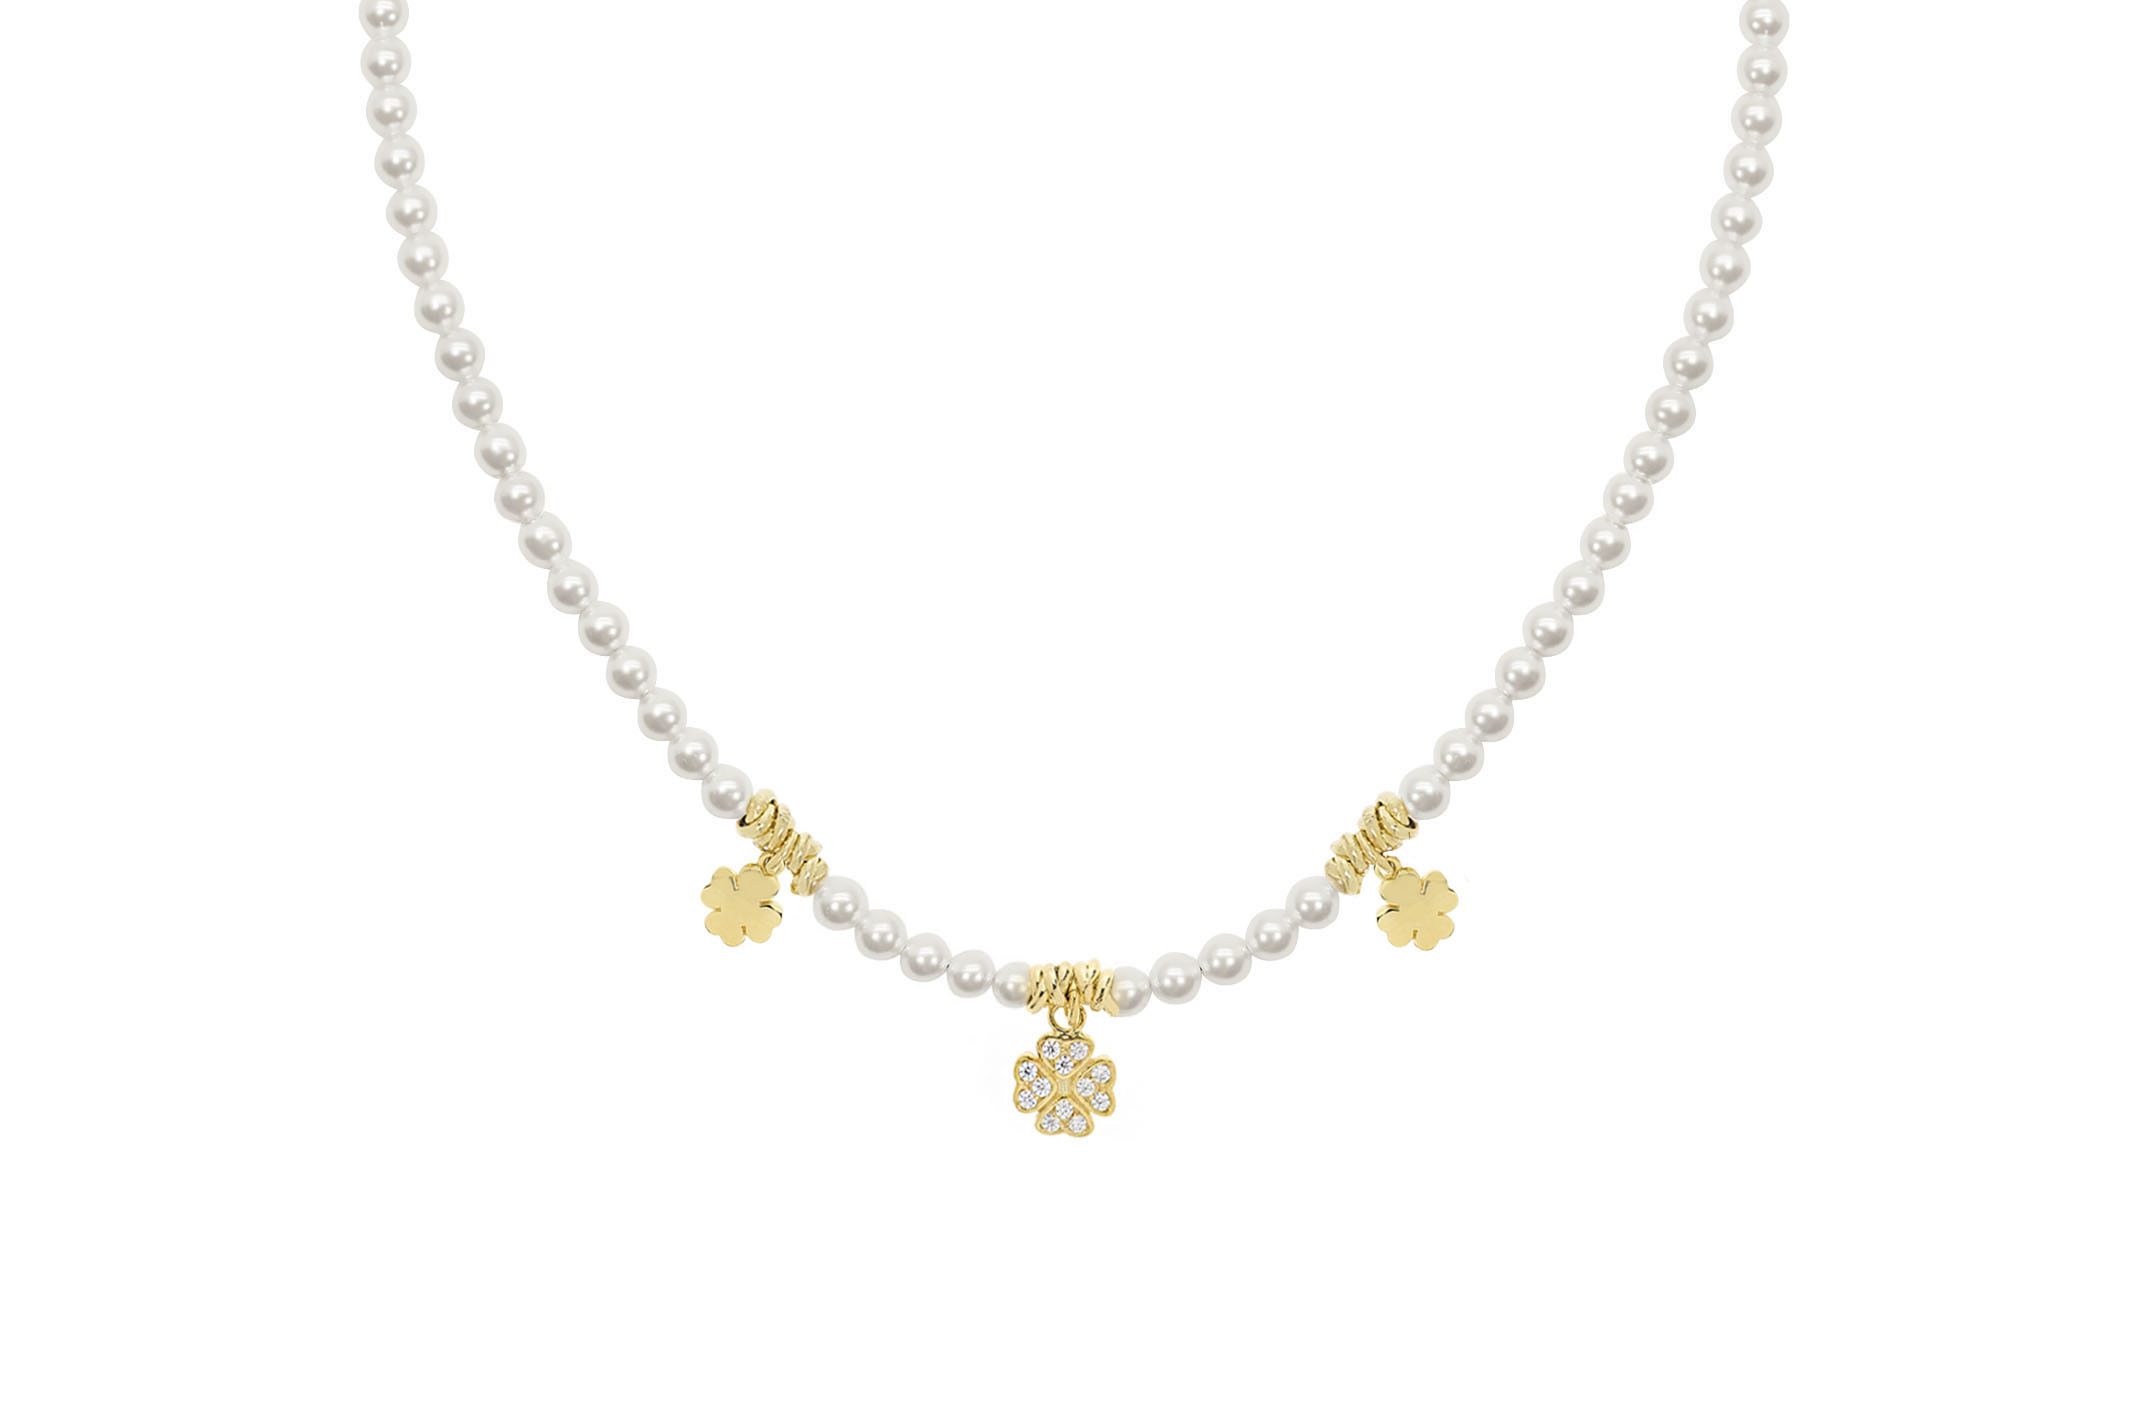 Jewel: necklace;Material: silver 925;Weight: 21.4 gr;Stone: pearl & zirconia;Color: yellow;Size: 40 cm + 4 cm;Pendent size: 0.5 cm